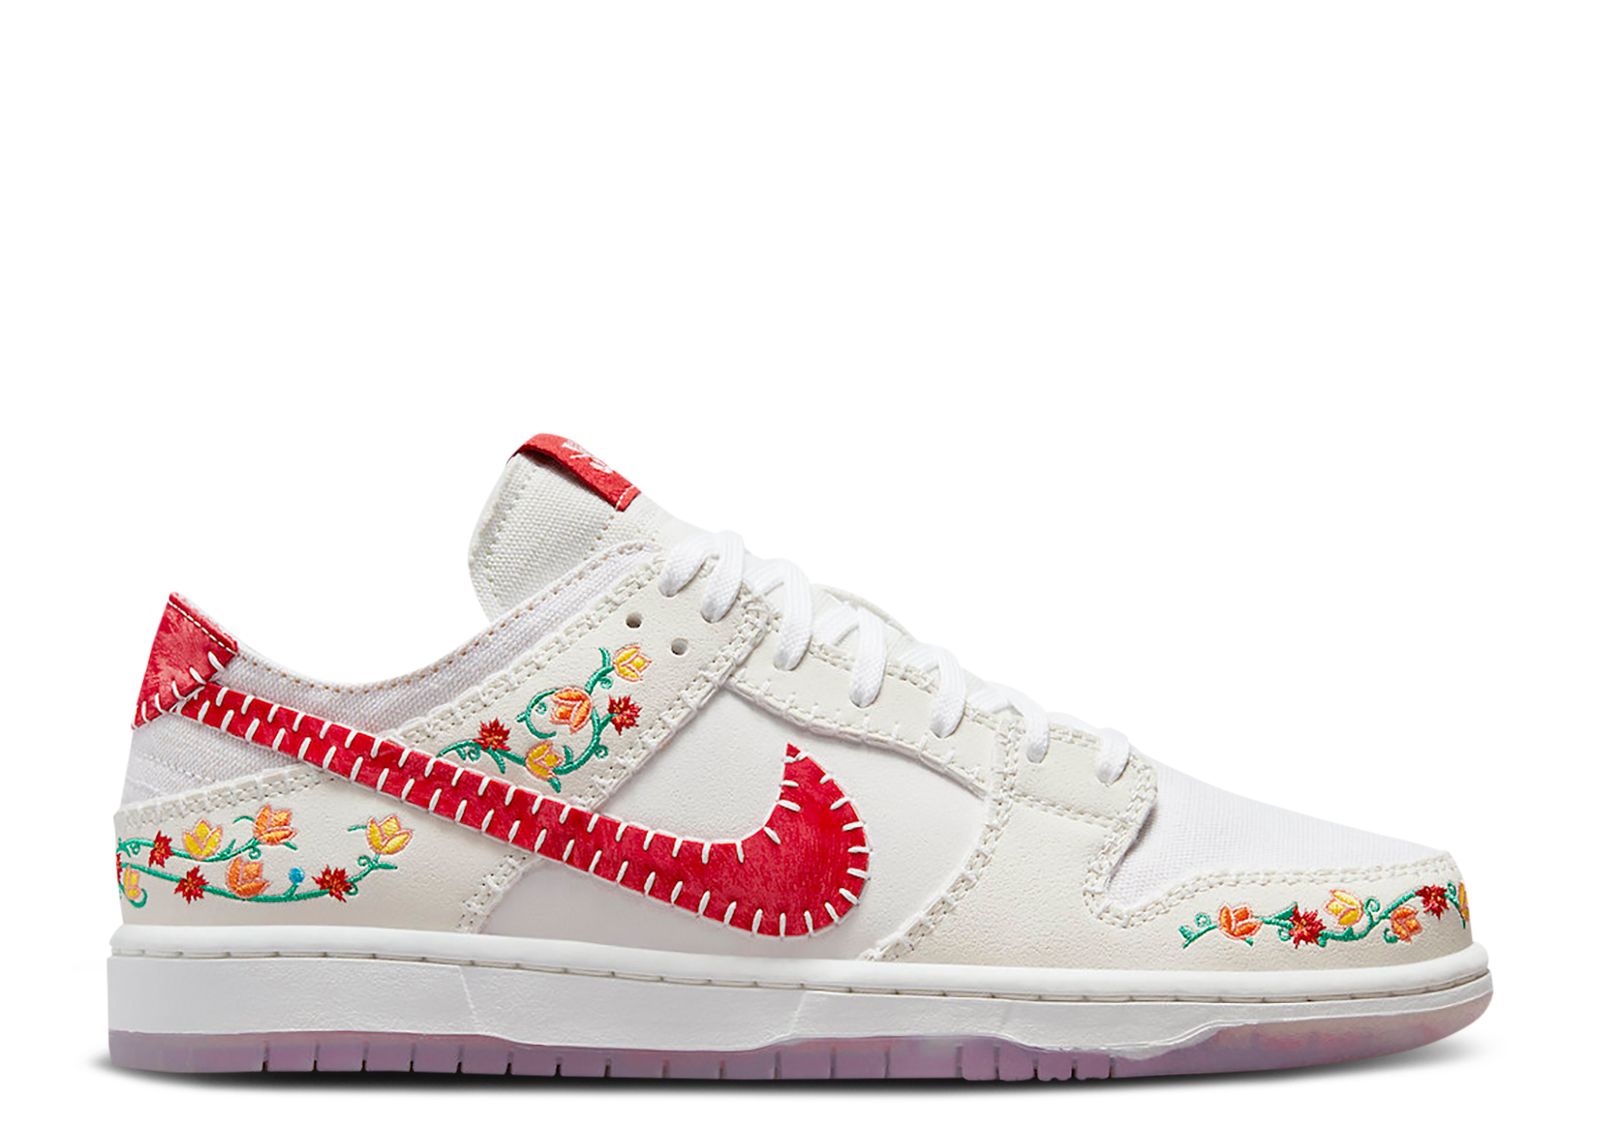 Кроссовки Nike Dunk Low Decon Sb 'N7 - Sail University Red', белый кроссовки nike dunk low athletic department picante red серый